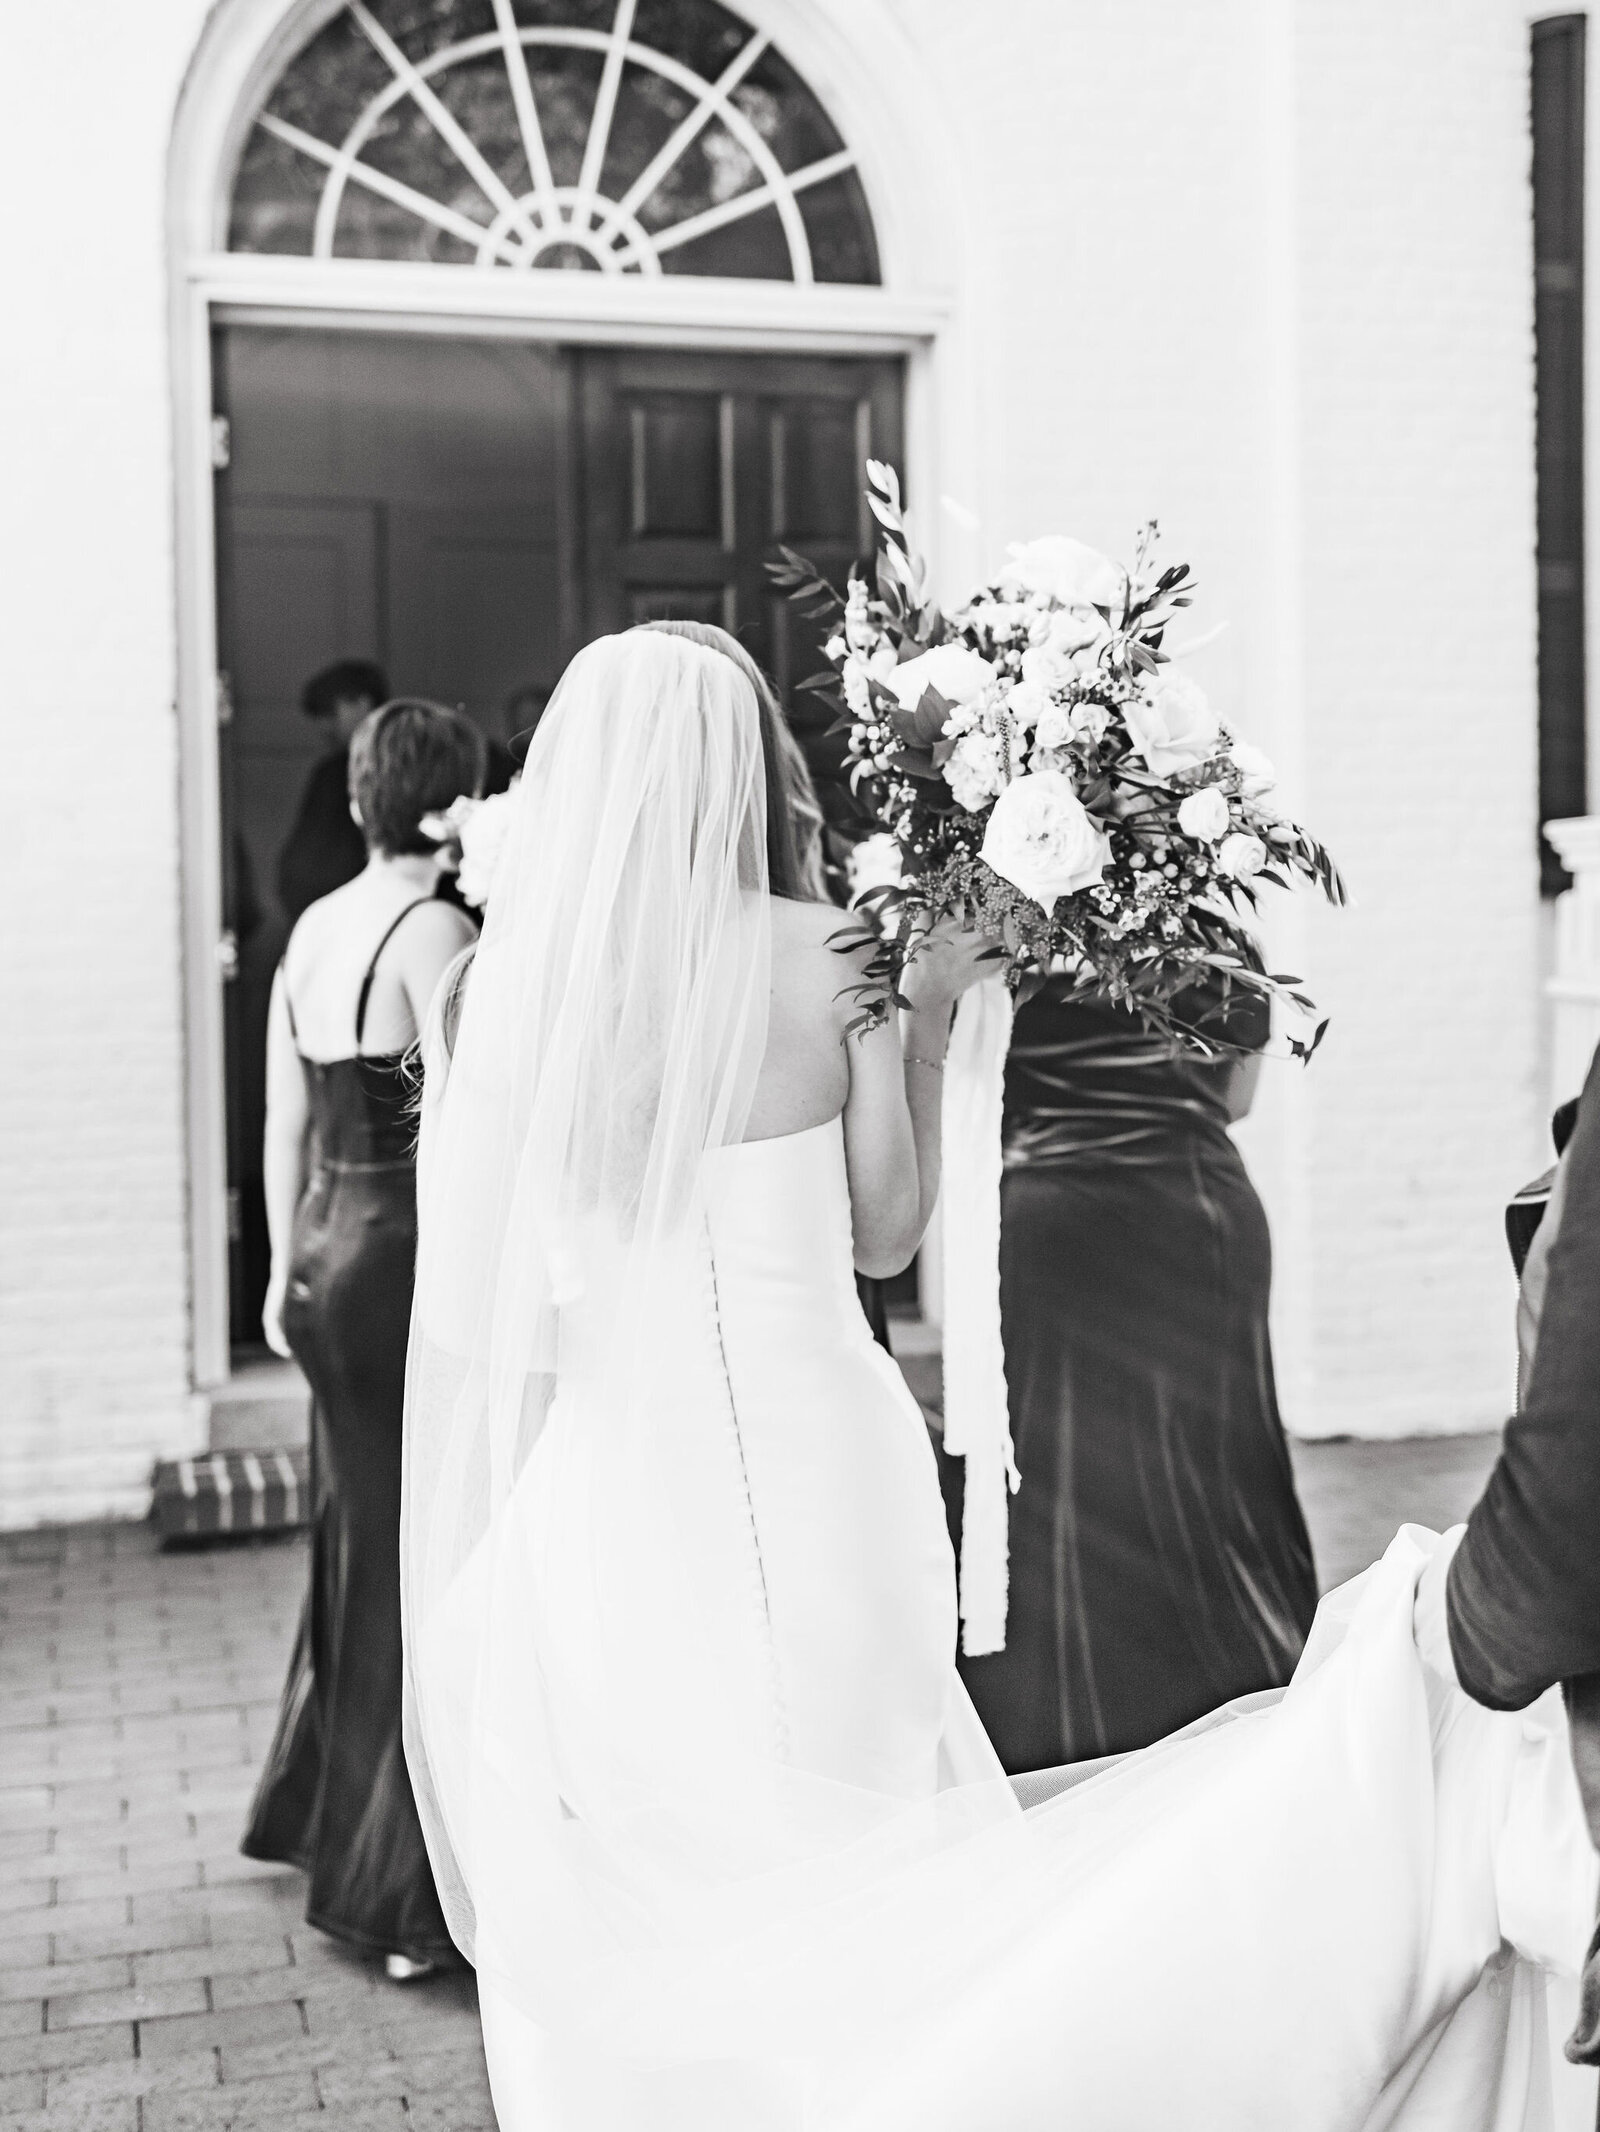 Wedding ceremony at Old Christ Church in historic pensacola